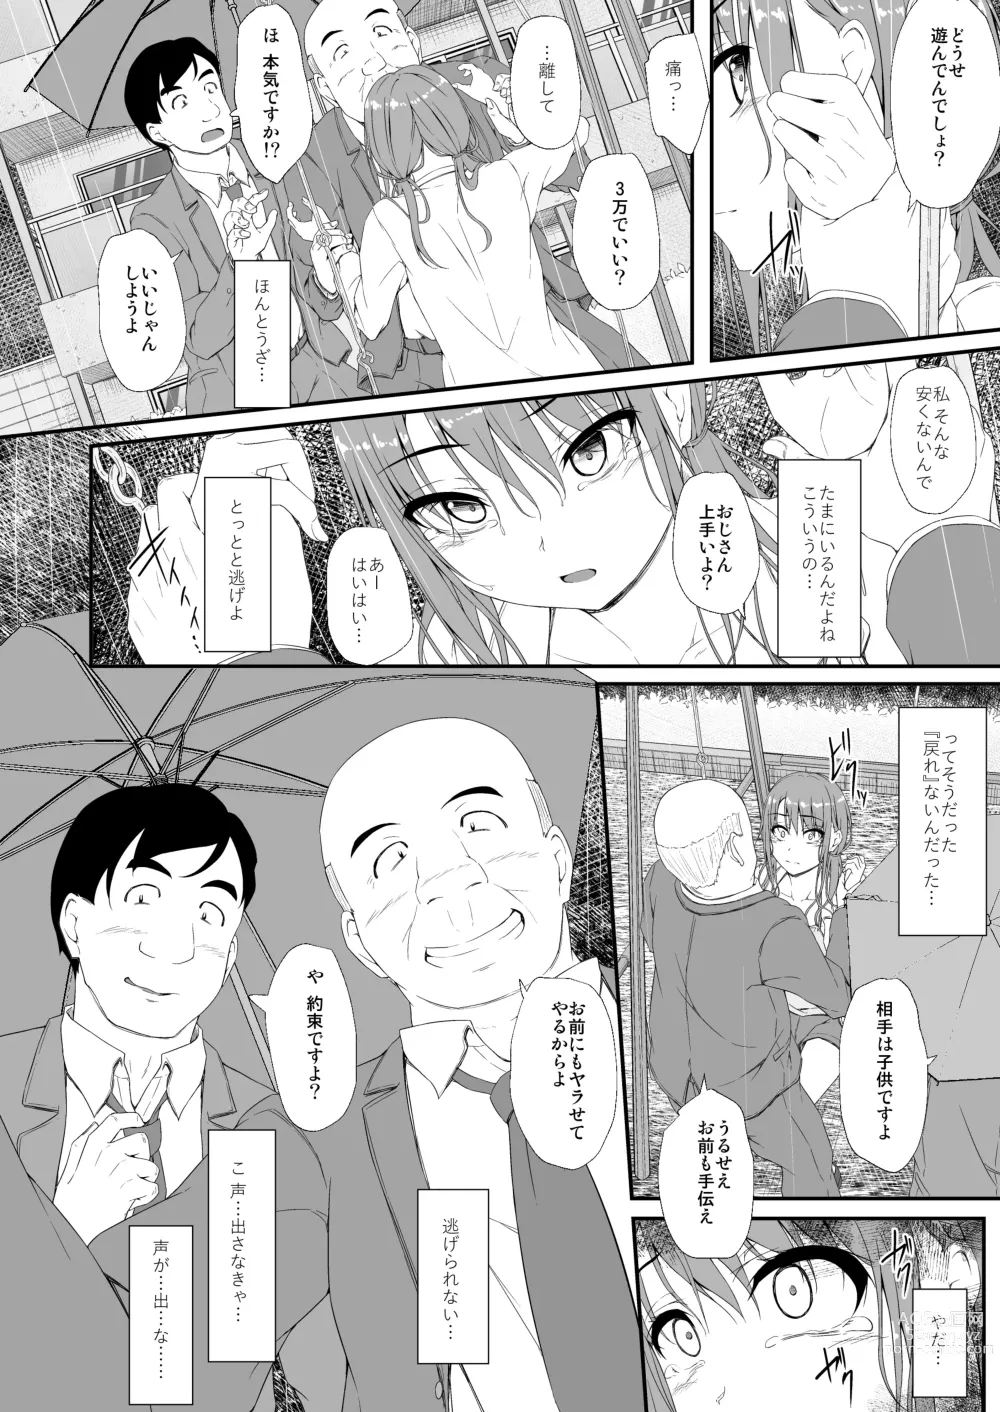 Page 7 of doujinshi Re:Temptation 6